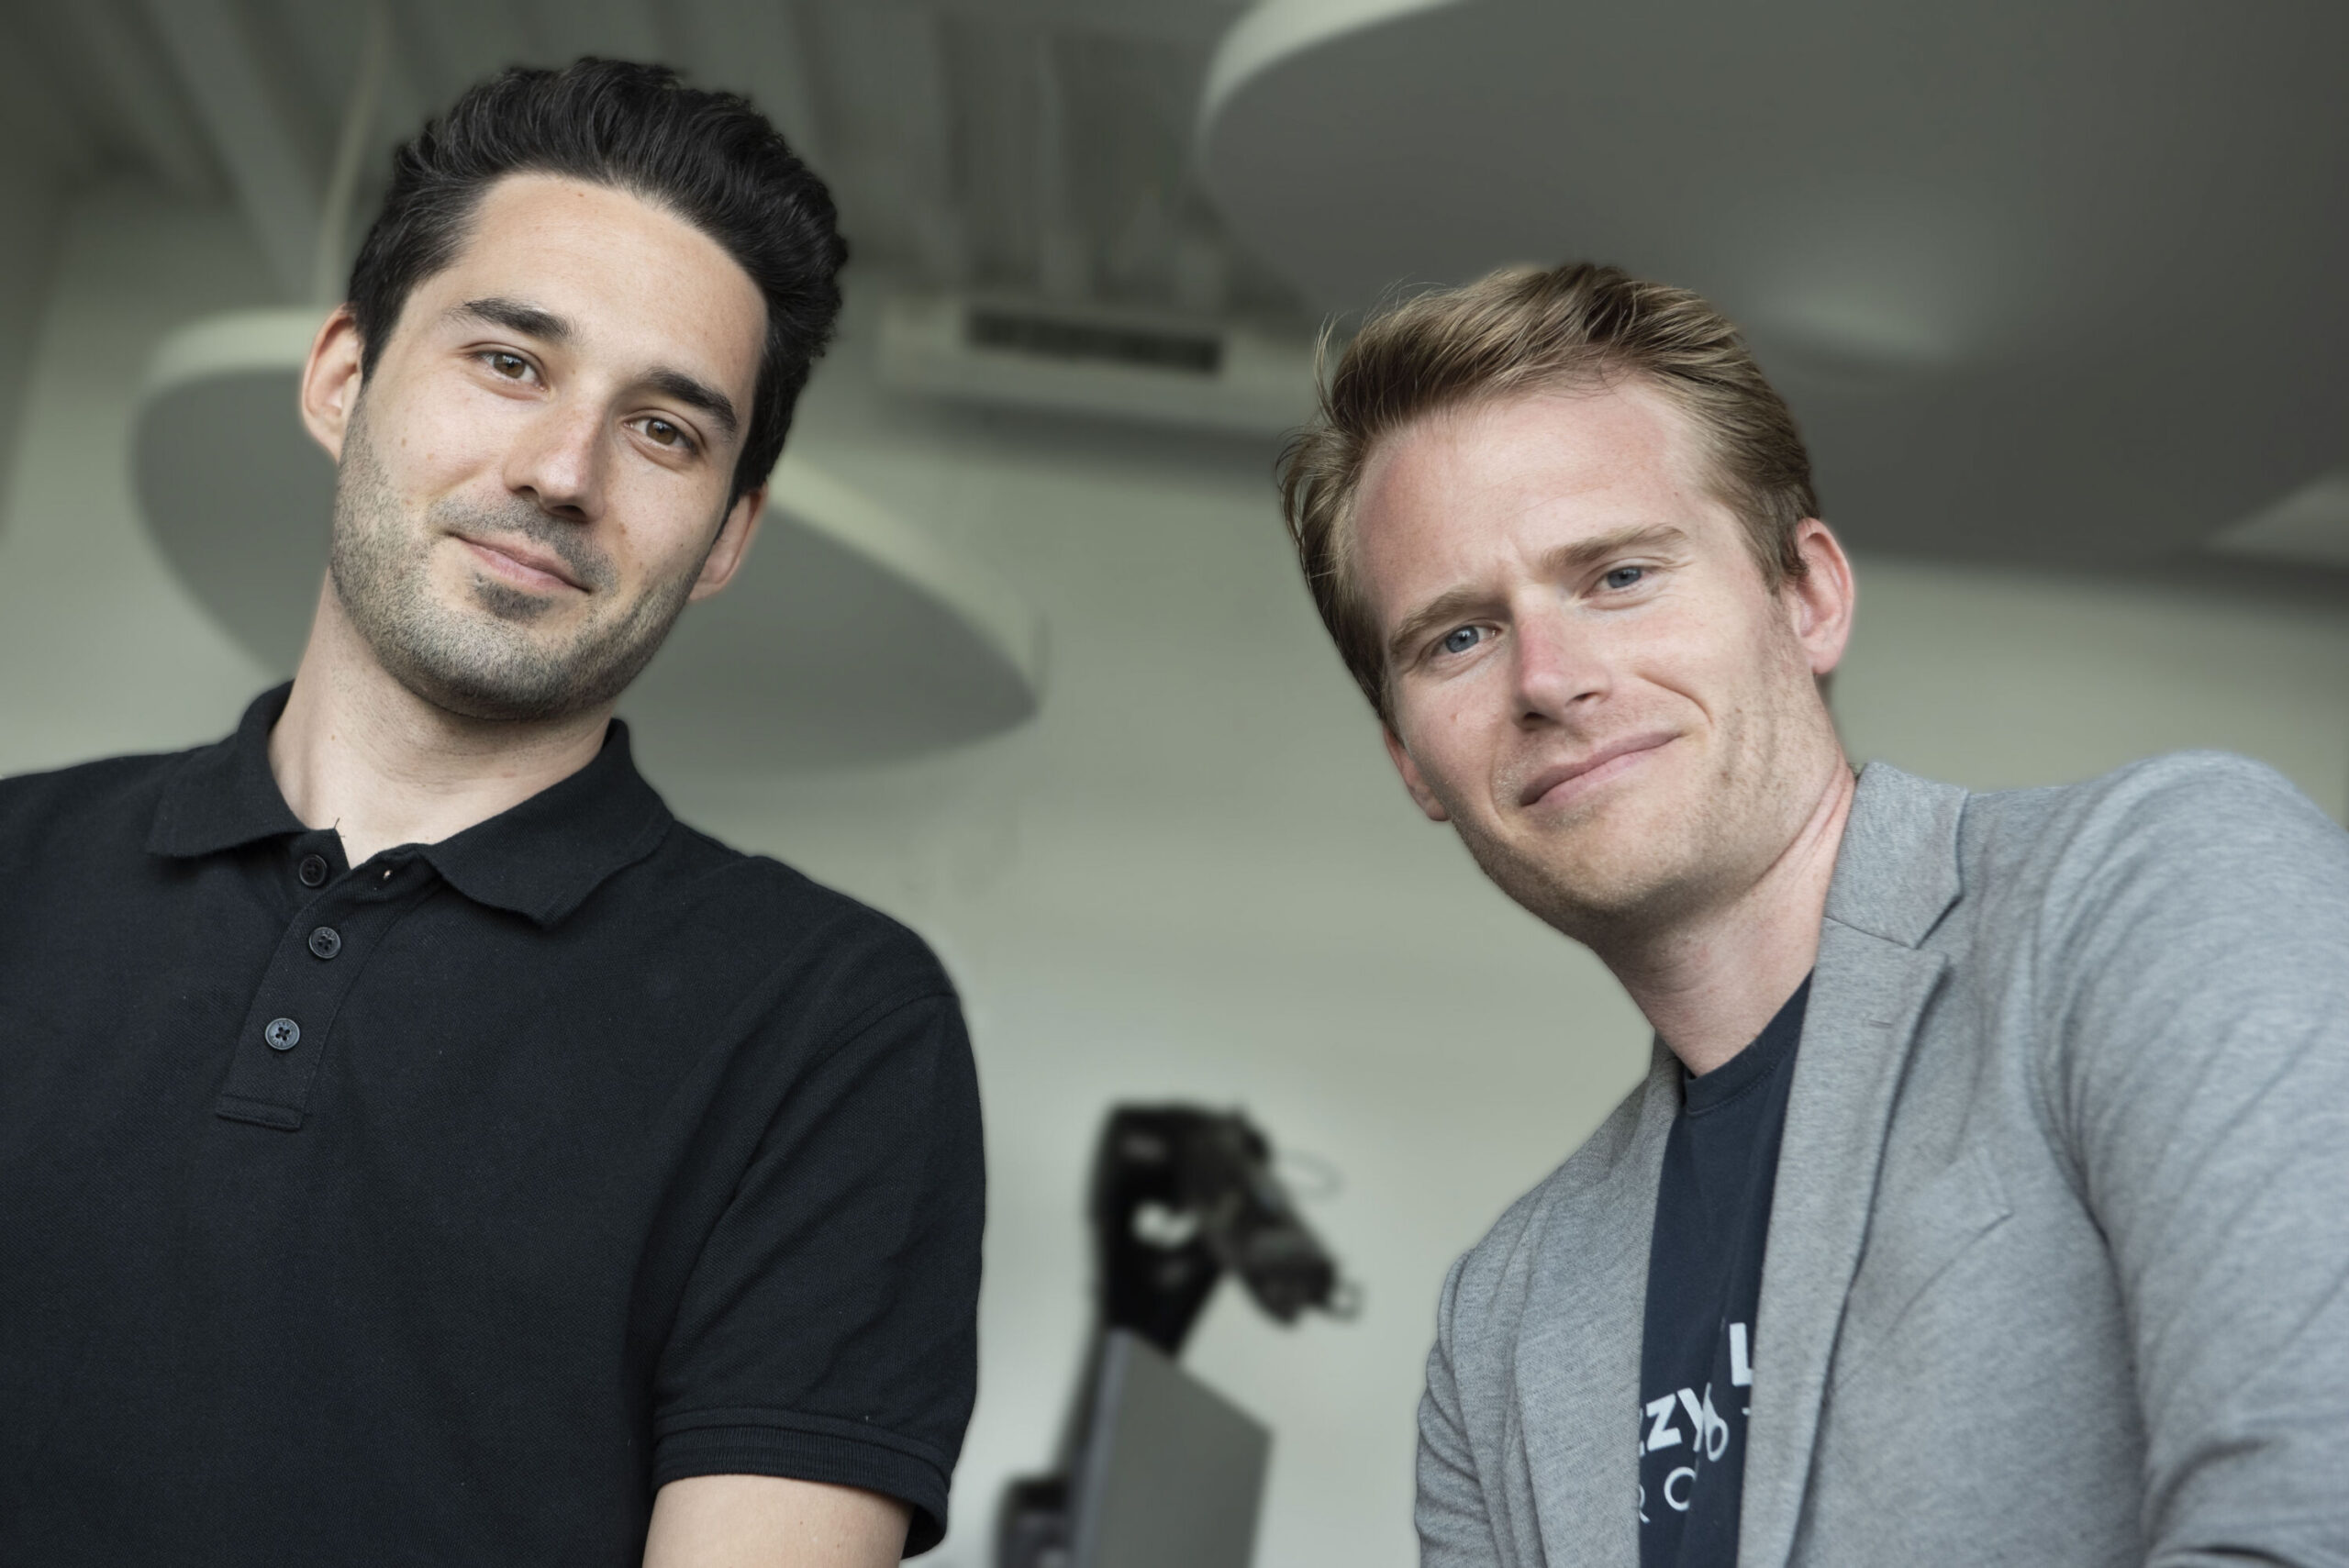 Fuzzy Logic raises €2.5 million to put robots in the hands of operators